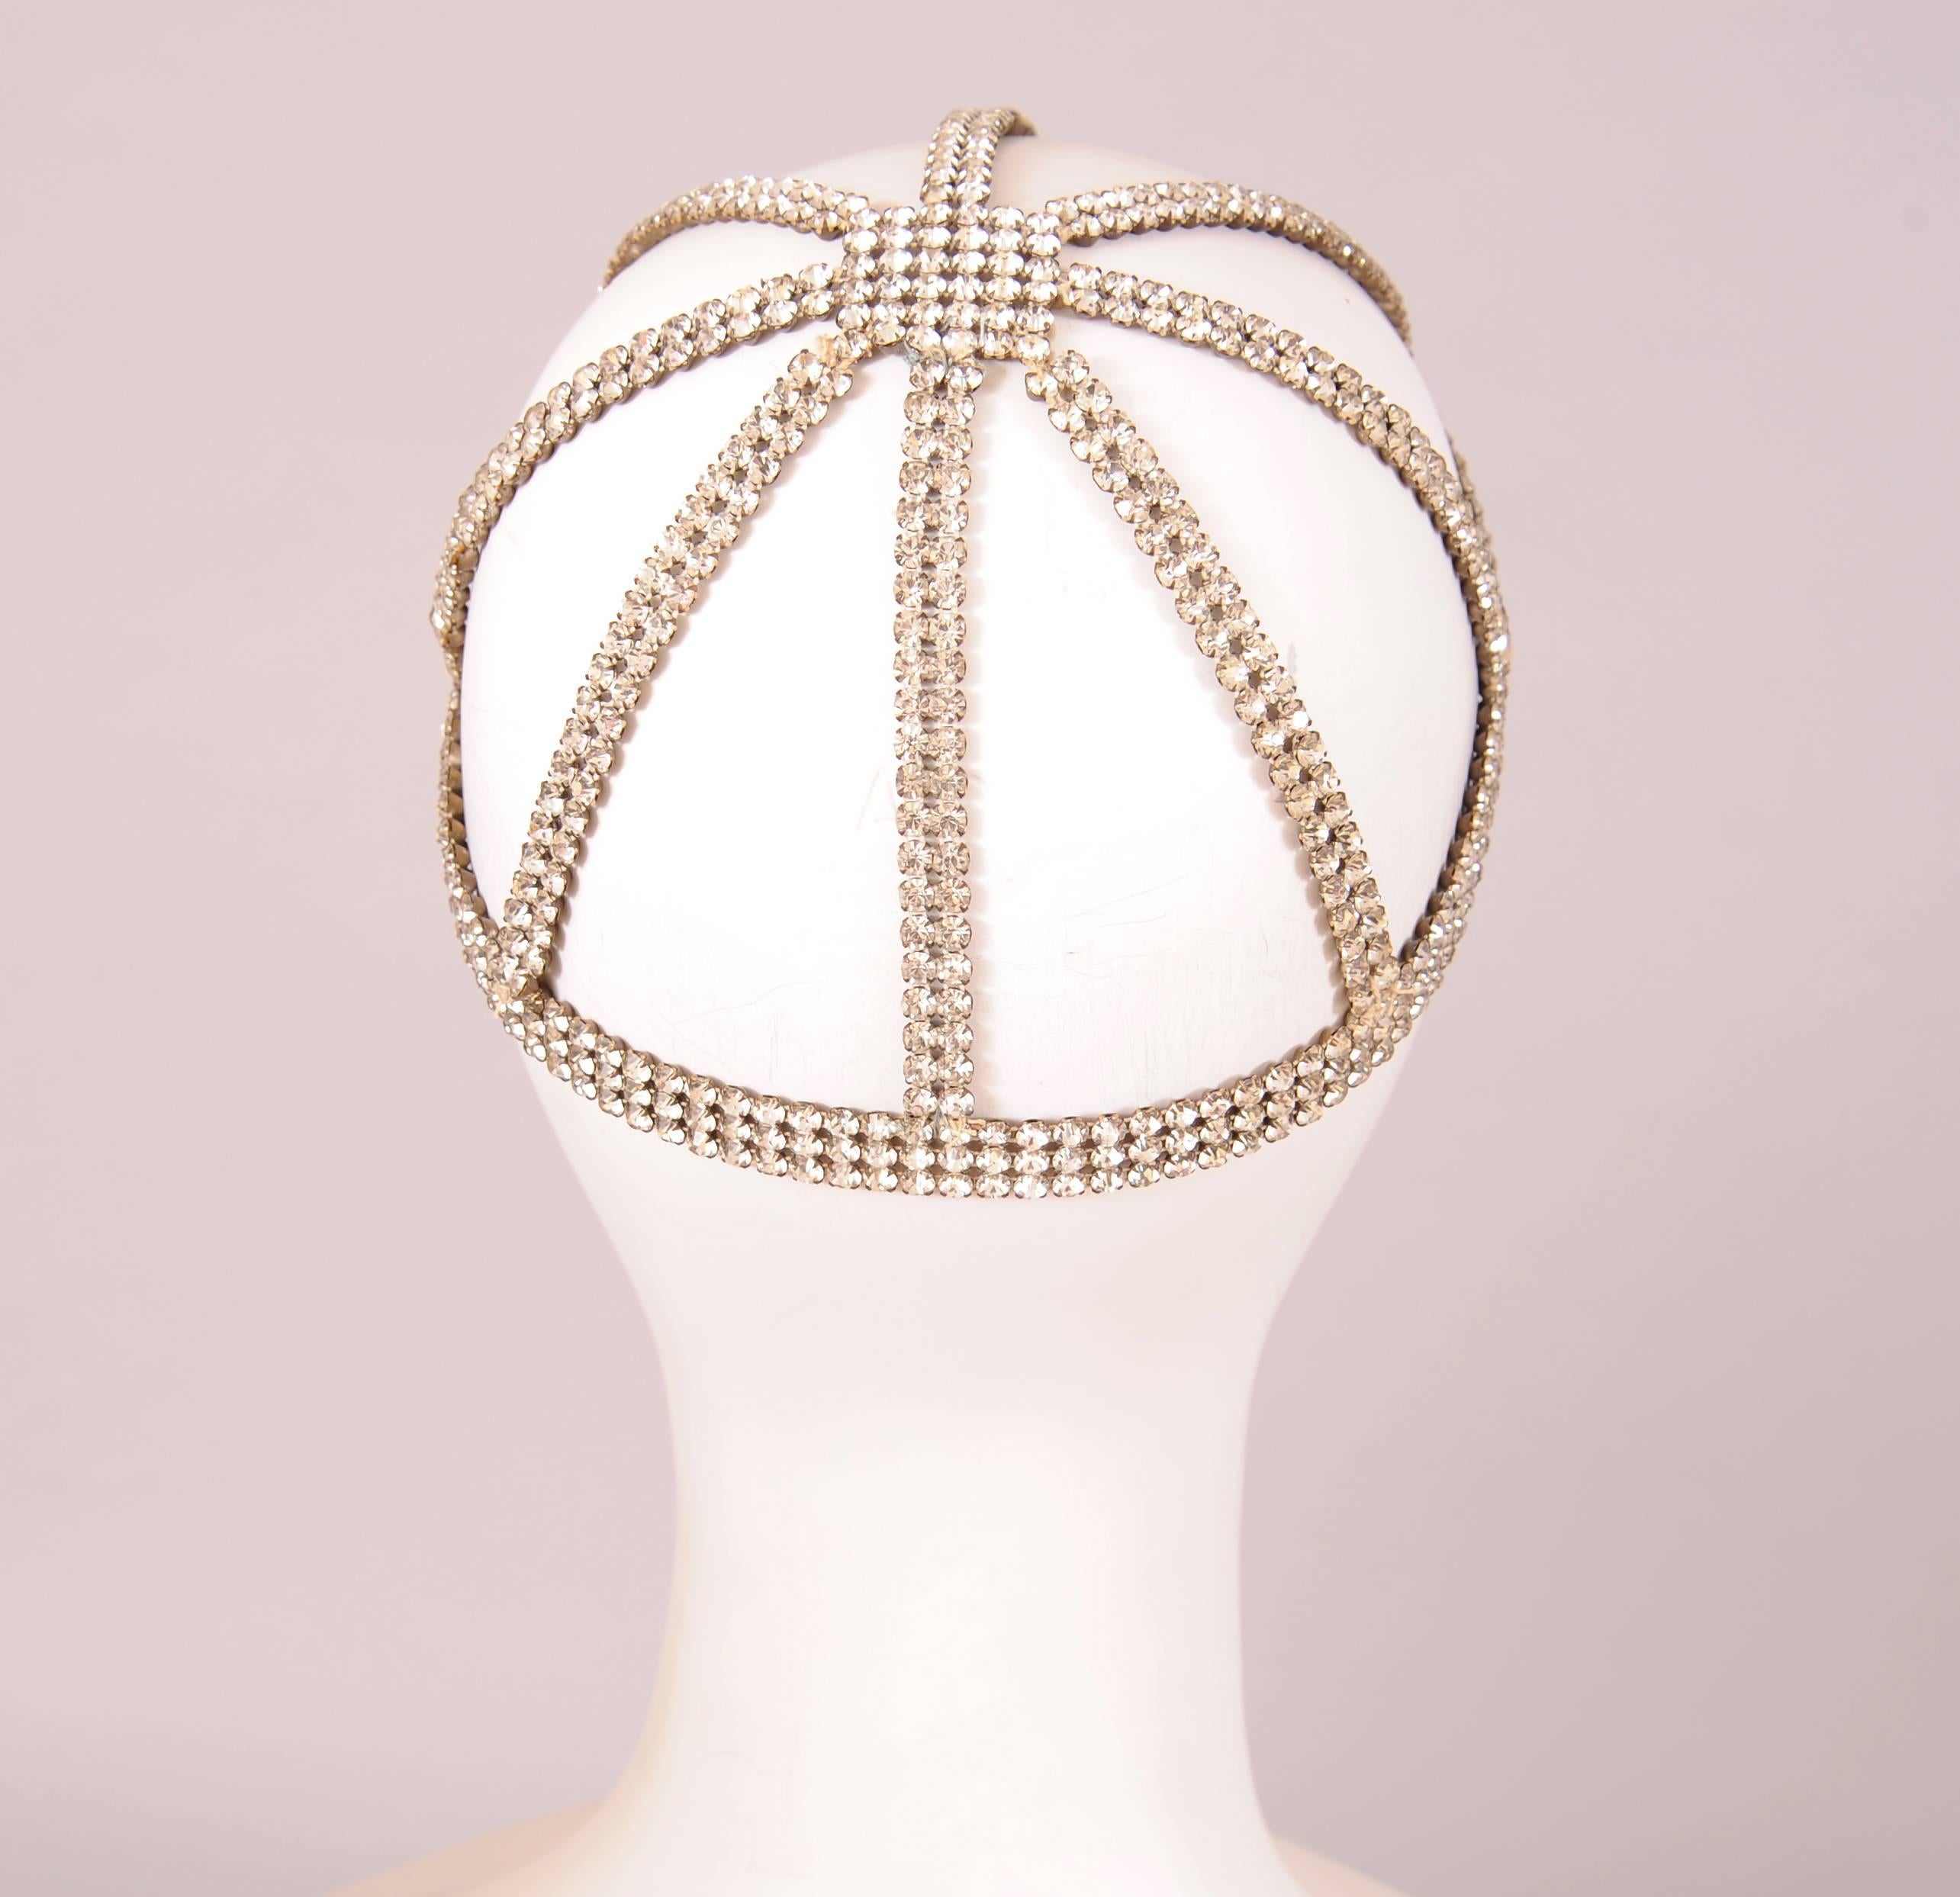 A square of sparkling rhinestones sits at the center of this stunning evening head piece. Eight double rows of rhinestones run vertically to the brow band at the base. This rare survivor from the Flapper era is entirely hand made from rhinestones.